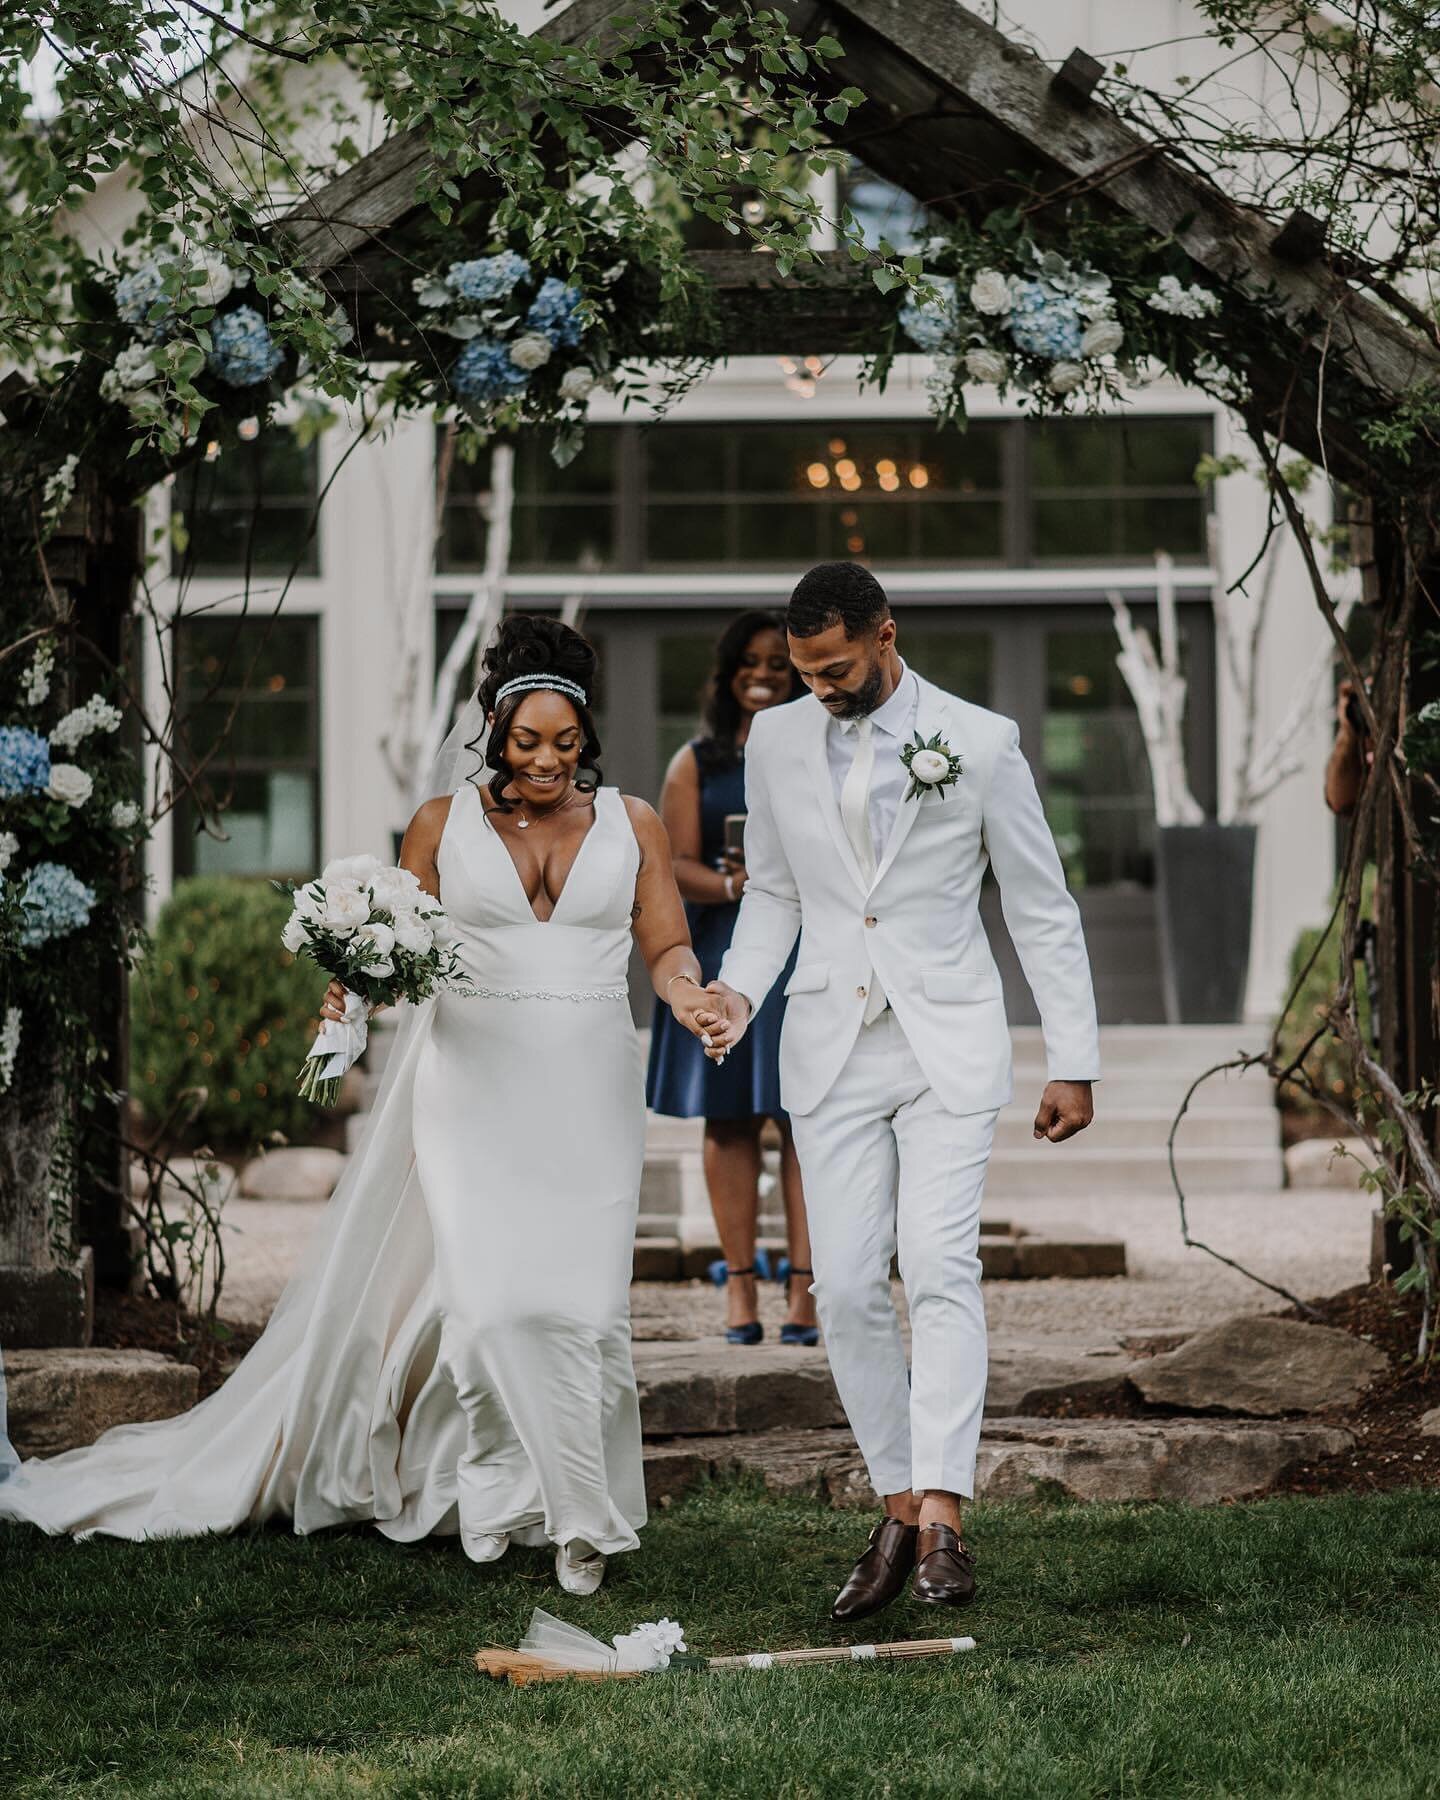 Pro Officiant Advice: 

After you jump the broom, please for the love of all things weddings, PLEASE take a moment to bask in your newlywed glow. Thank me later ✨ 

S + E 💍 5.27.23

Officiant: @minister_sharnise_sears 
Venue: @orchidhousewinery 
Pla